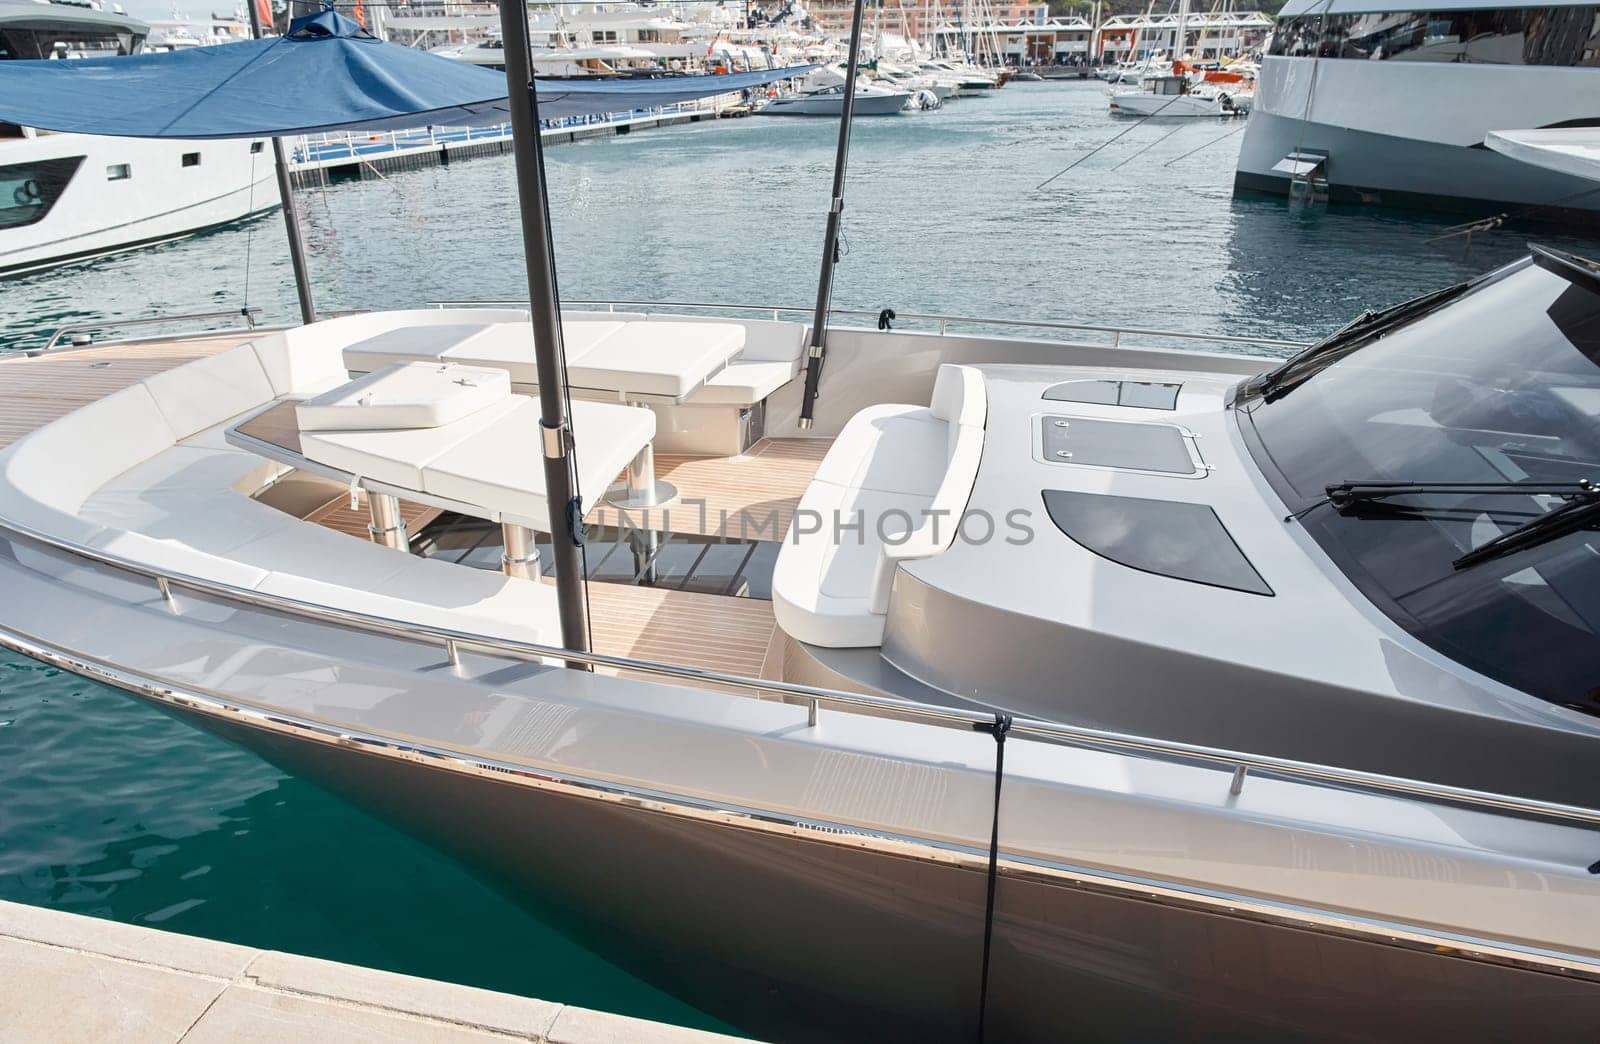 Close-up view of a relaxation area on the open teak deck of an expensive motorboat at sunny day, Monaco yacht show, large boat exhibition, wealth life, table and chairs by vladimirdrozdin